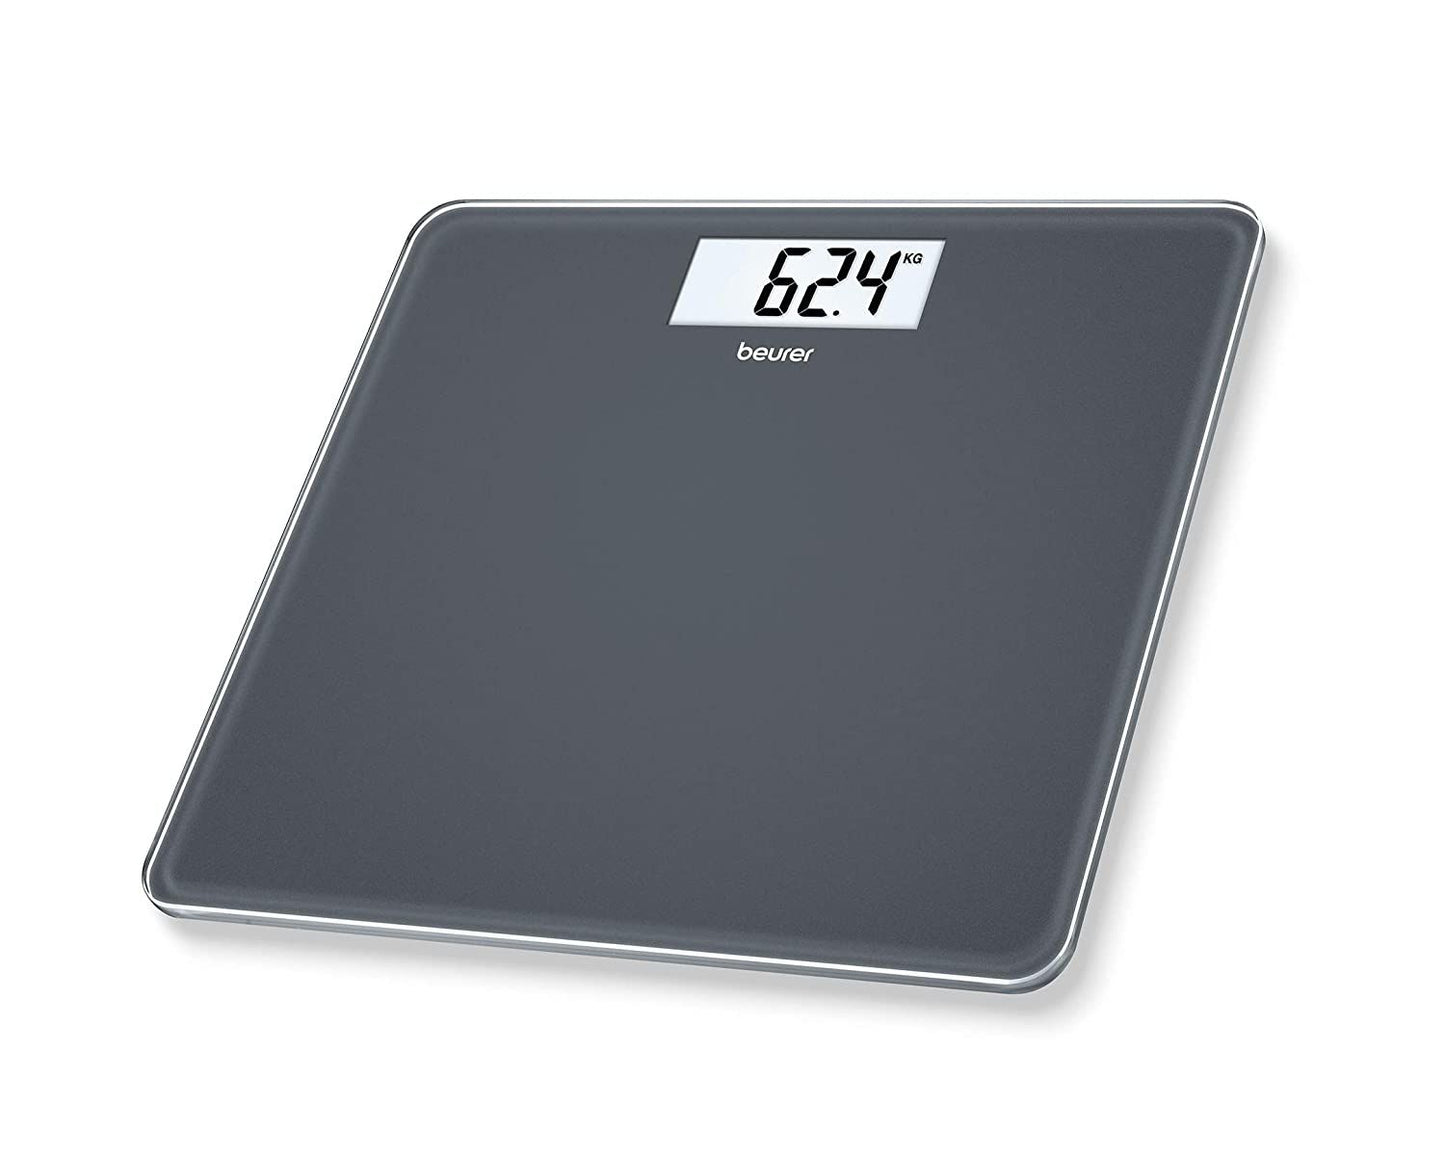 Beurer GS 213 glass bathroom weighing scale